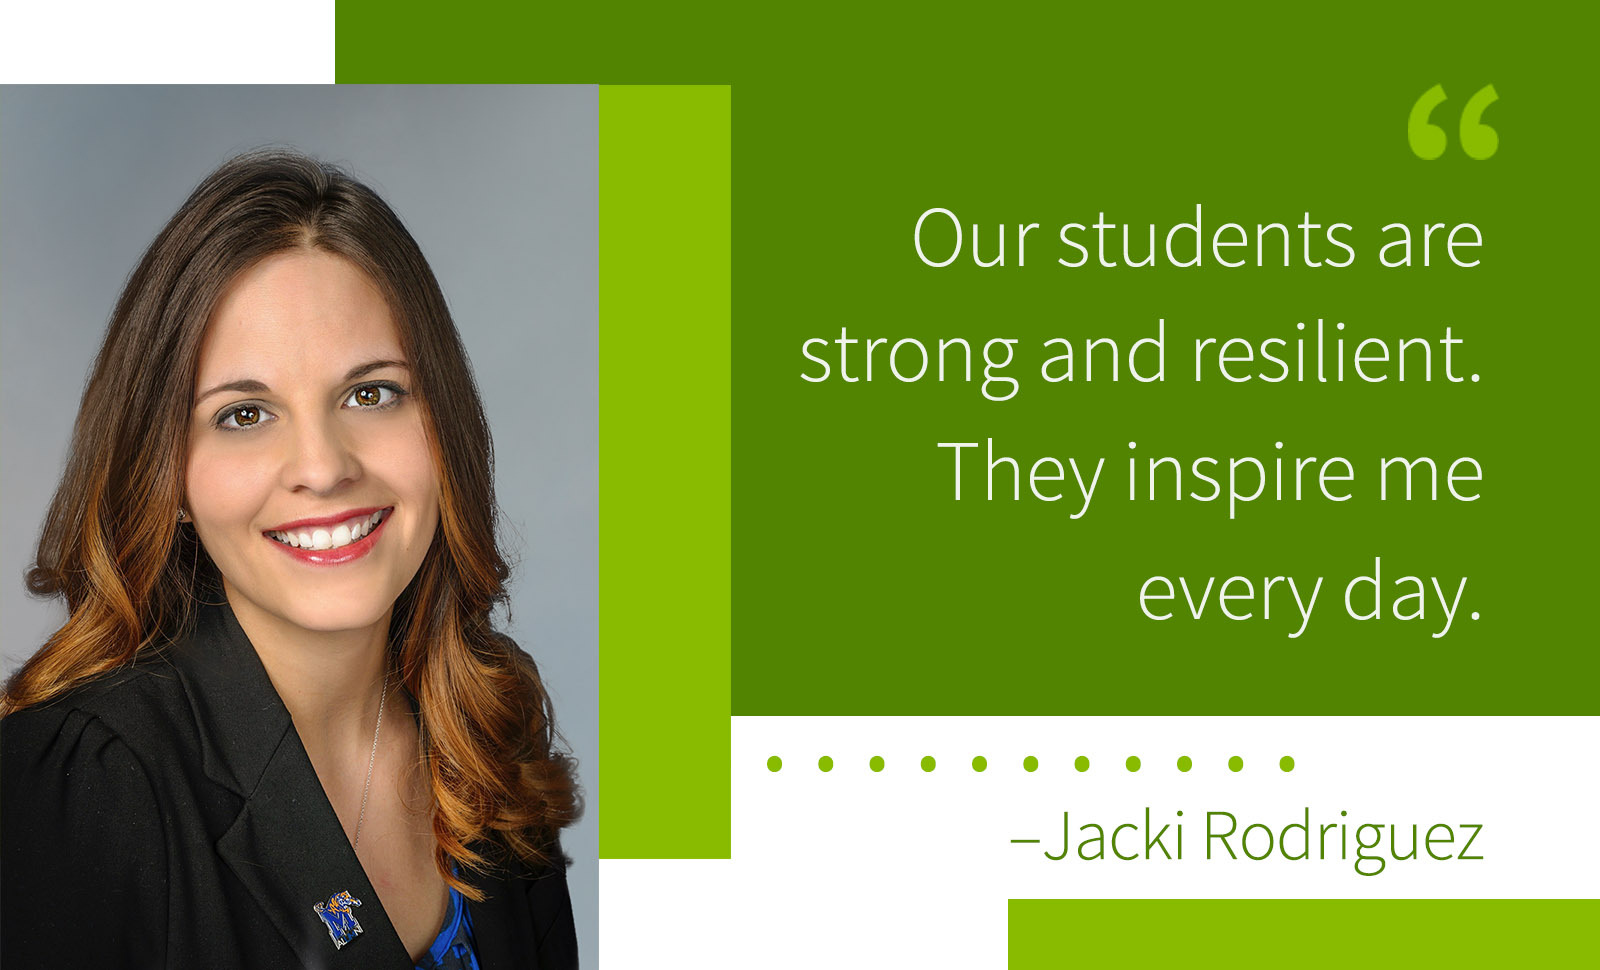 Quote. Our students are strong and resilient. They inspire me every day. –Jacki Rodriguez